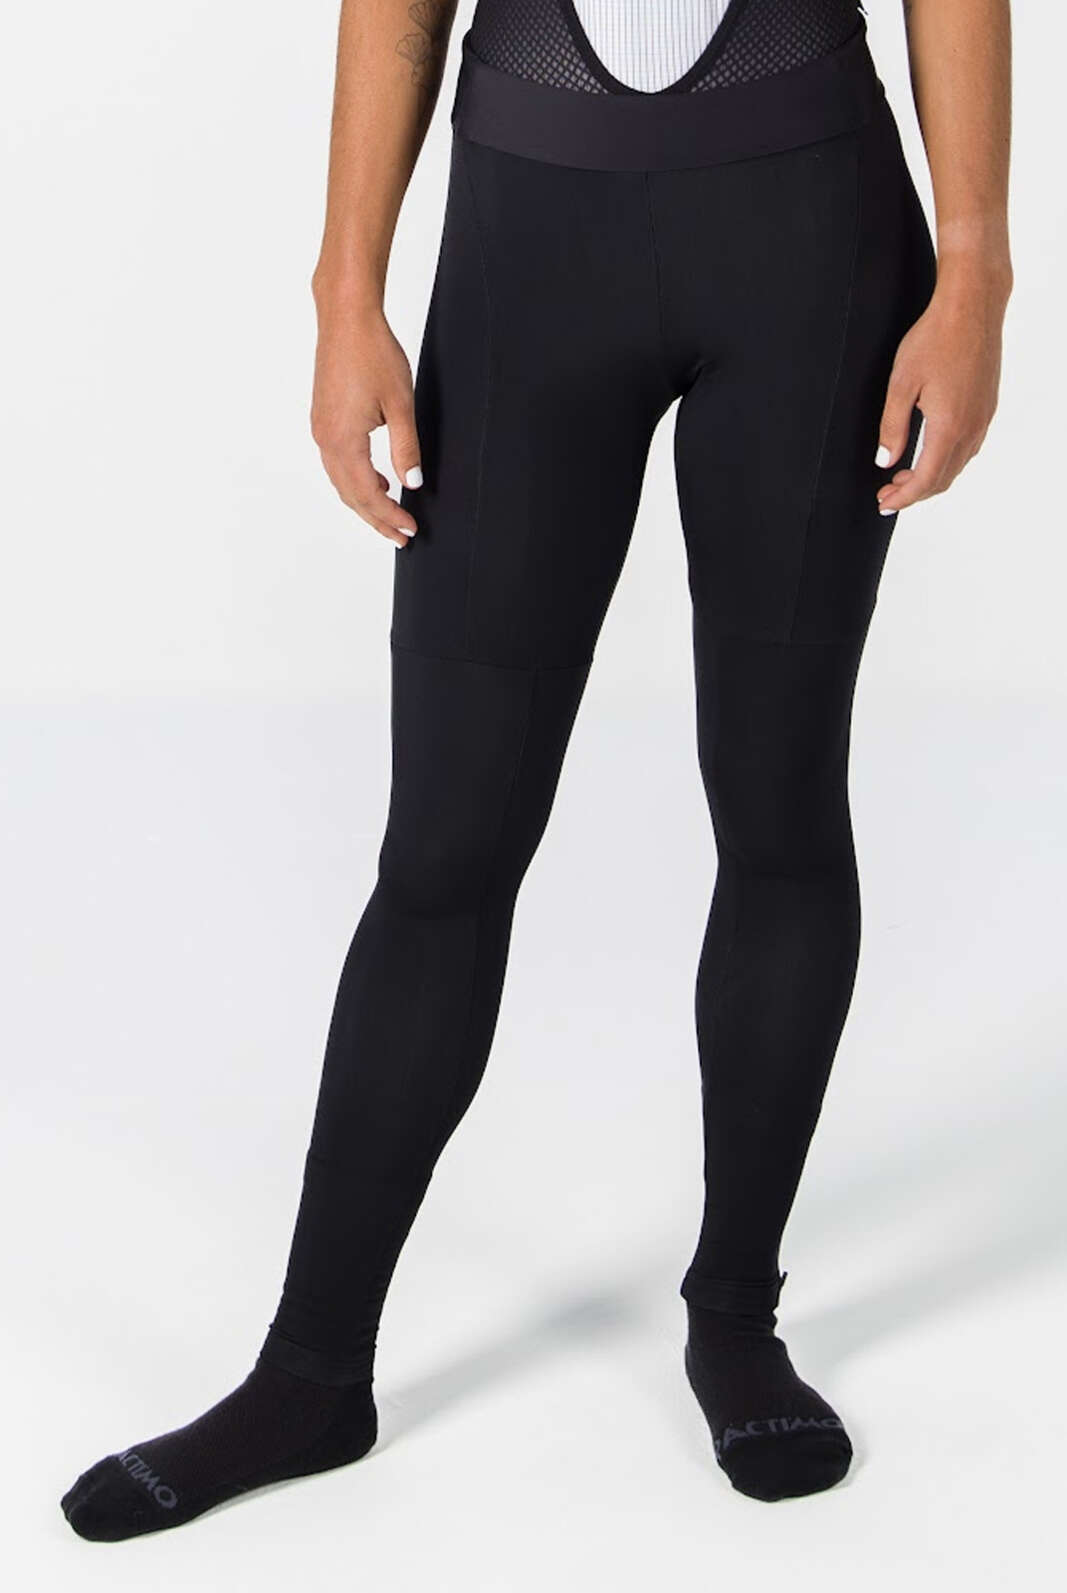 Women's Thermal Cycling Tights - Front View